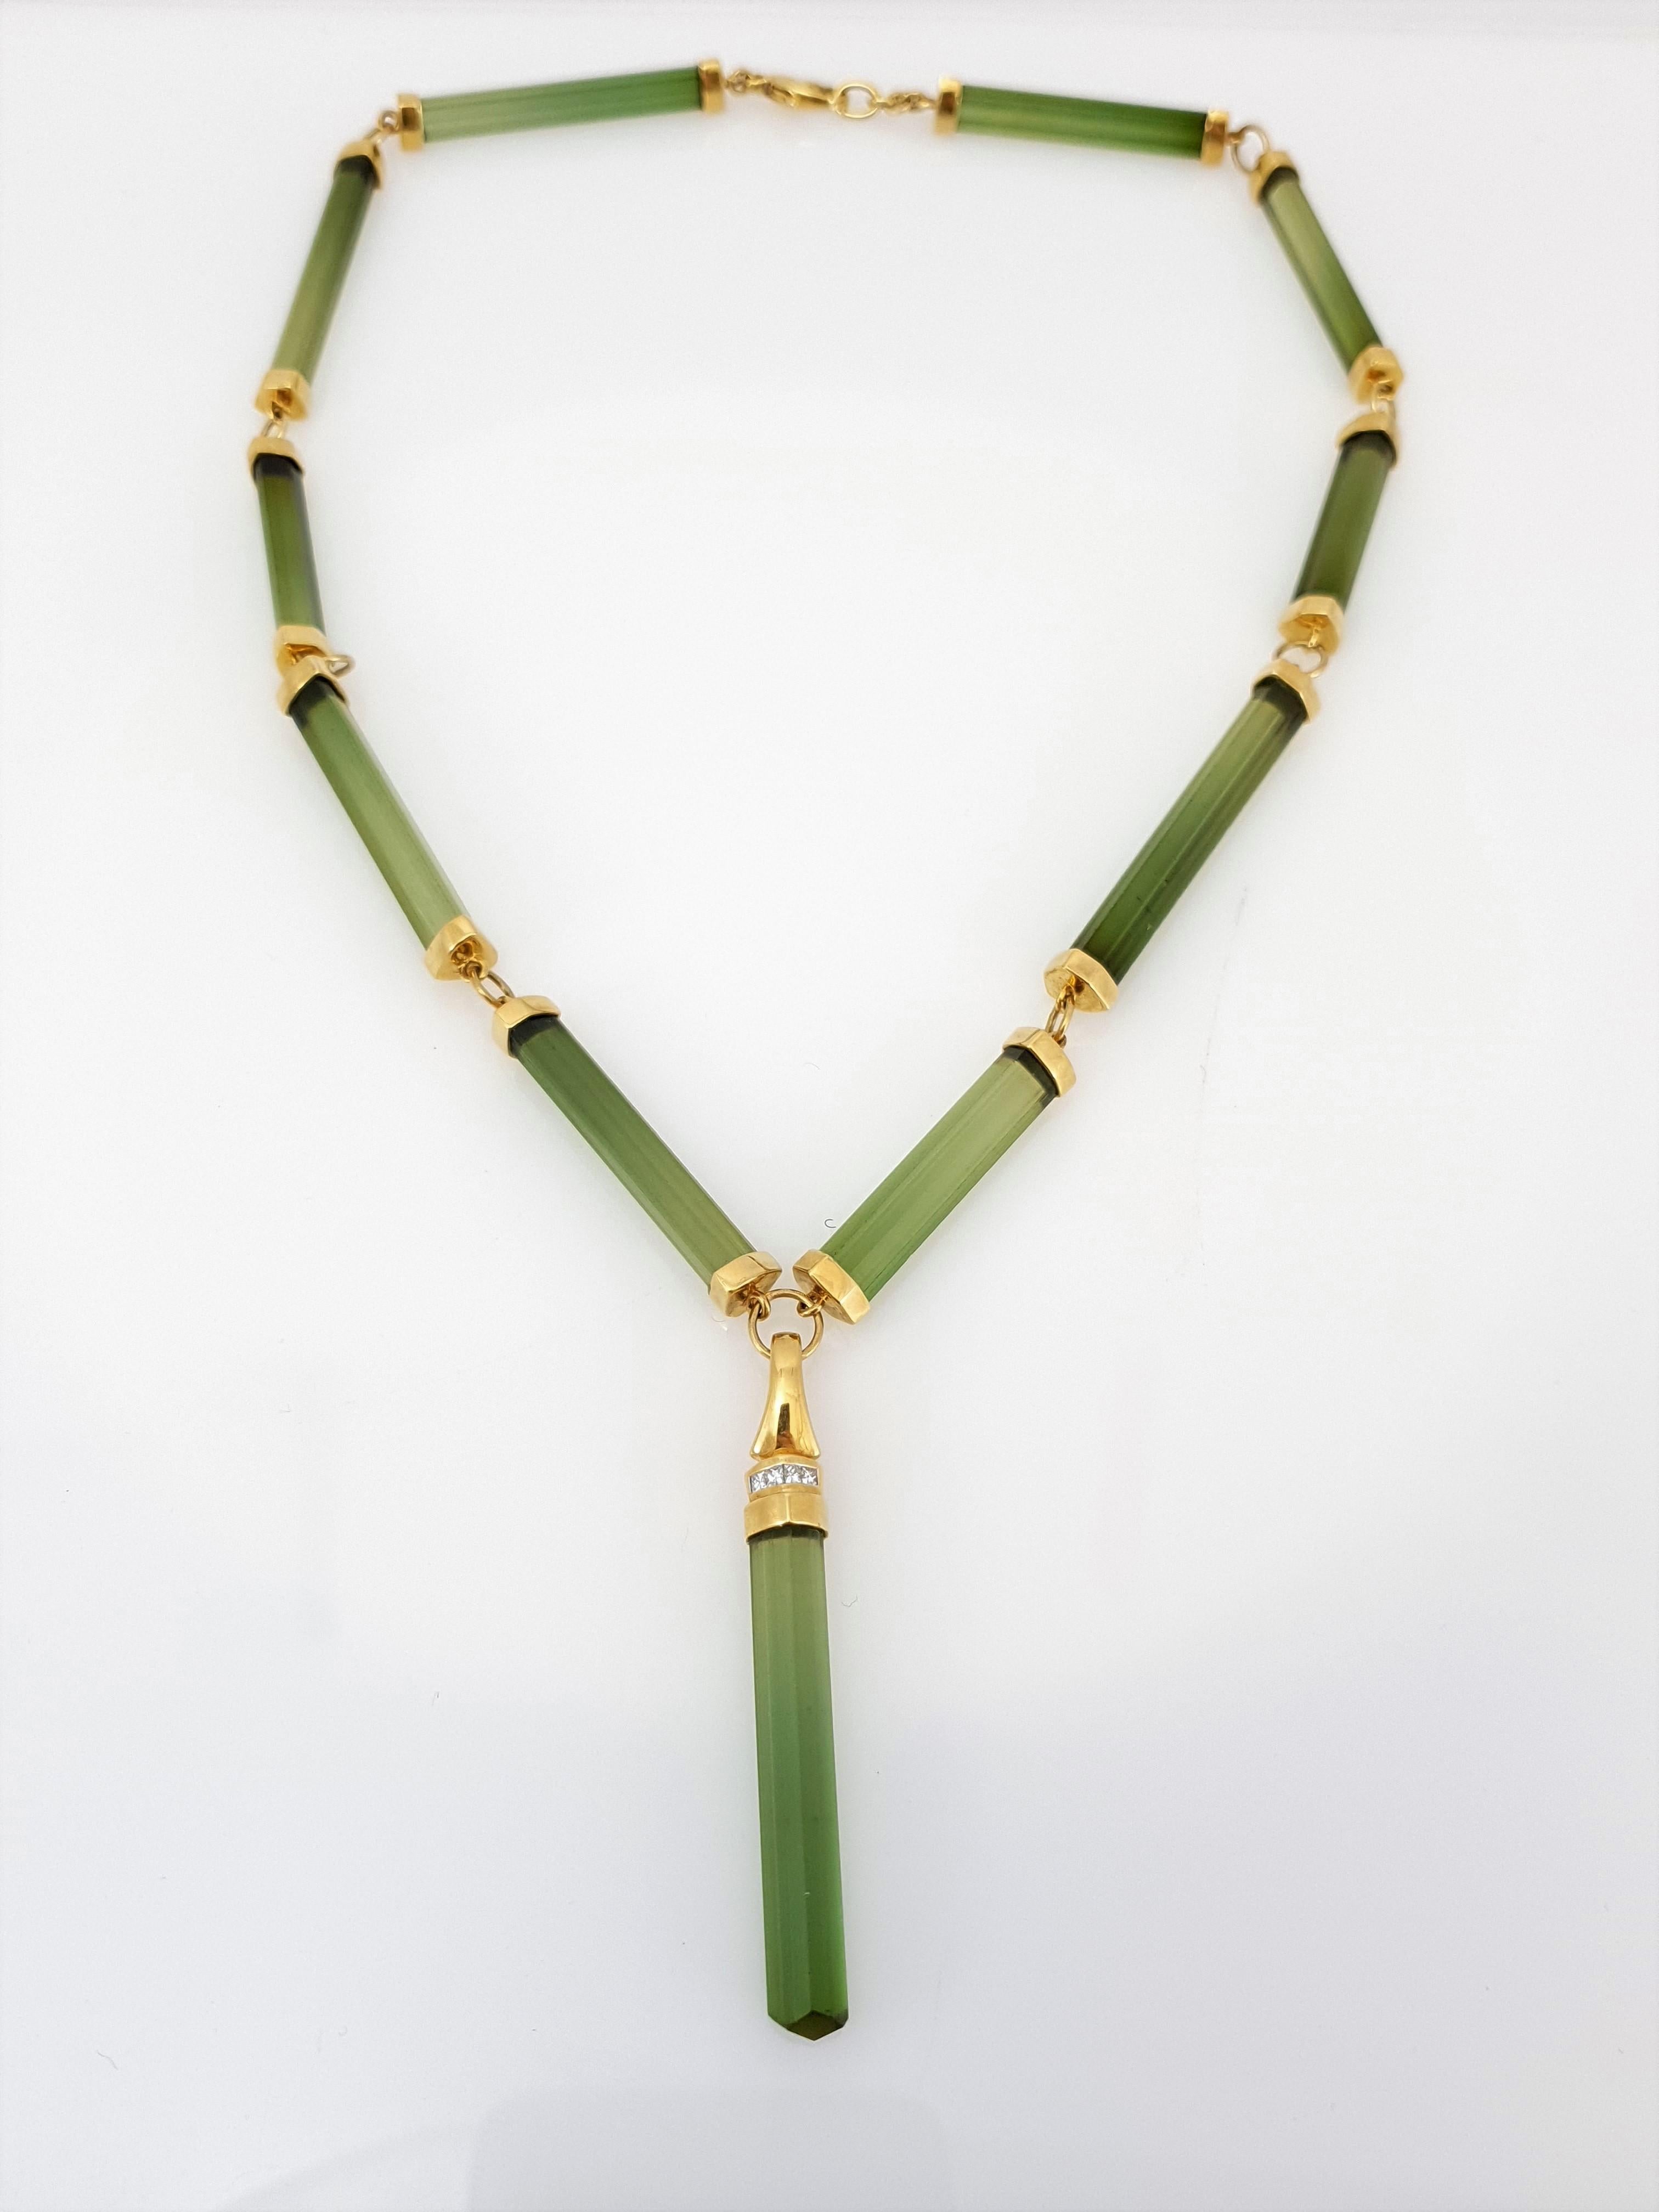 Green Tourmaline Crystal Beaded Necklace with 18 Carat Yellow Gold/Diamonds For Sale 1